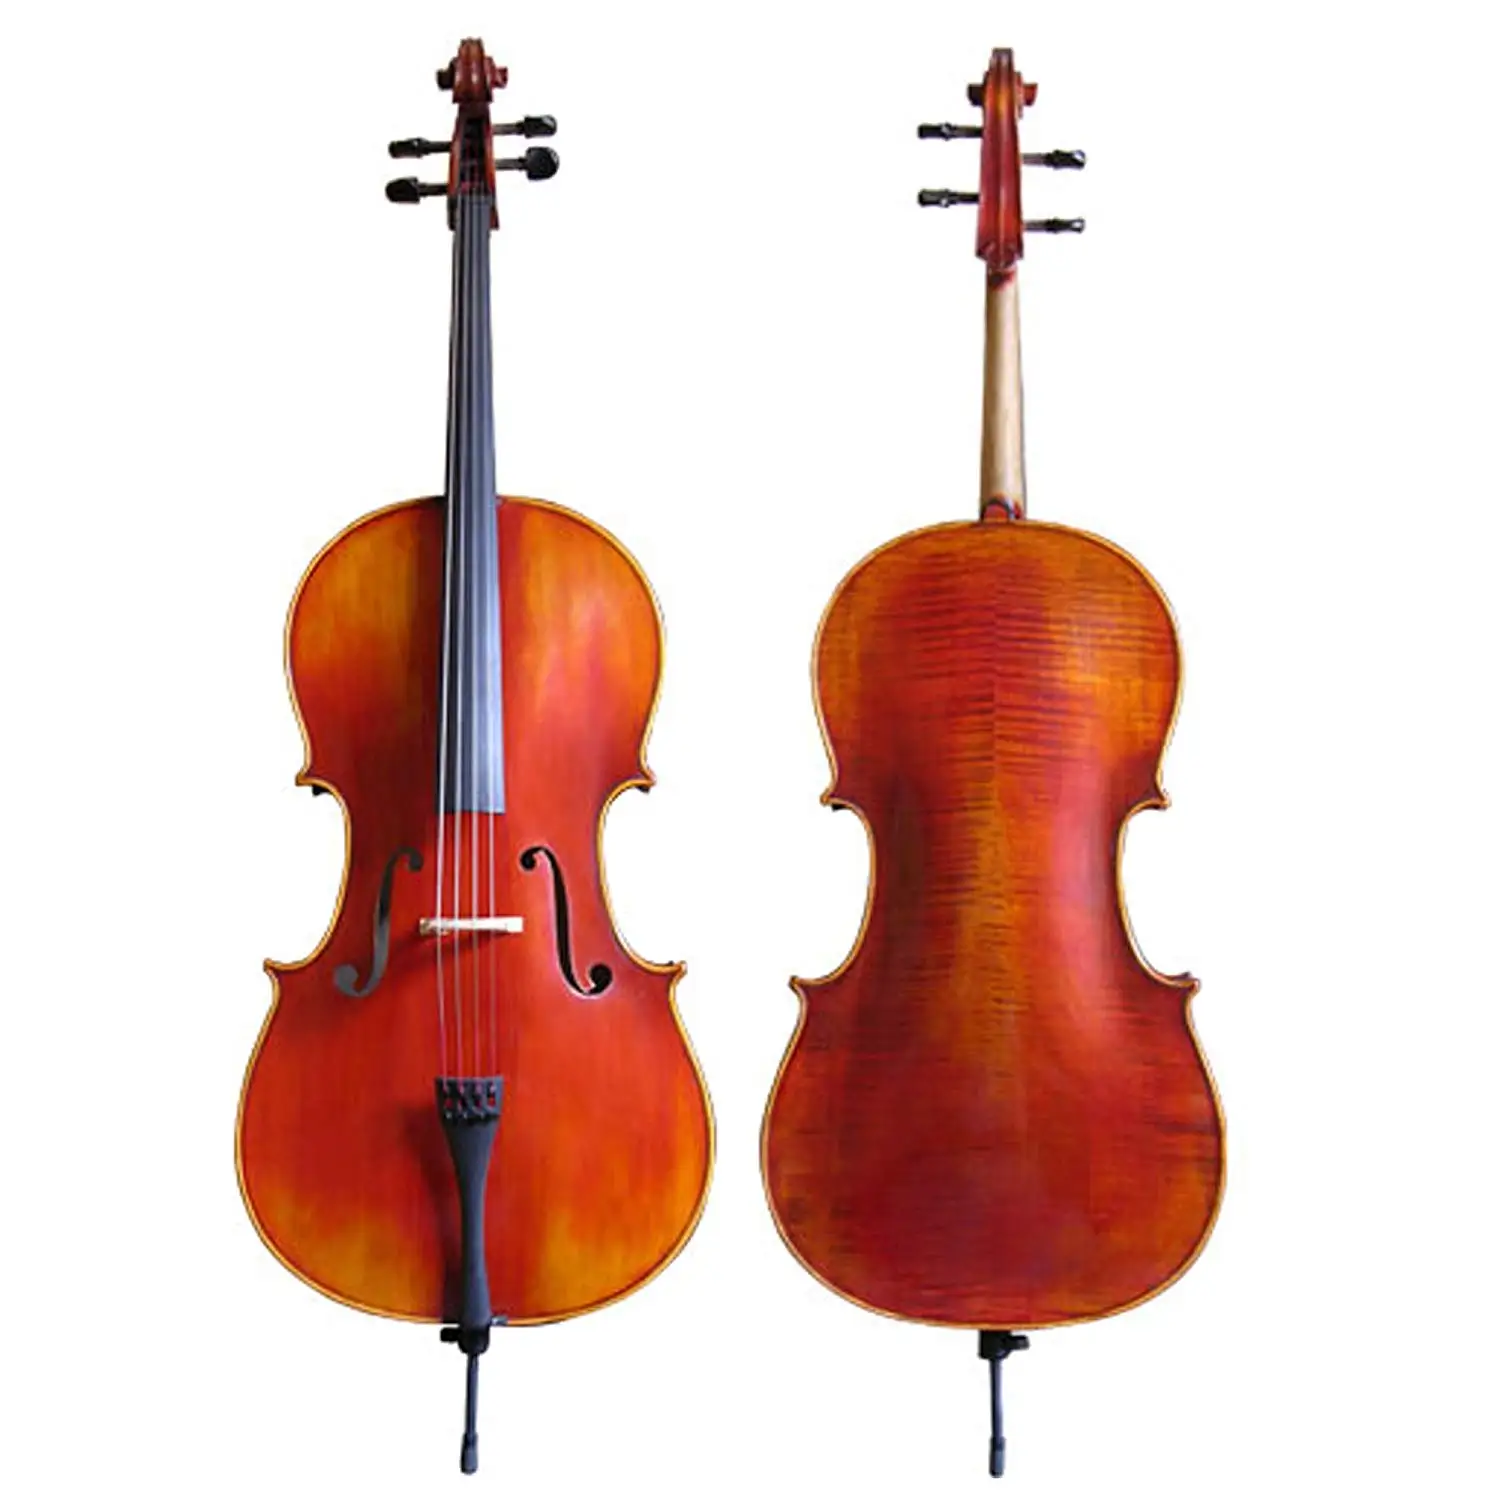 D’Luca Flamed Cello Outfit With Ebony fittings And Antique Finish, 1/2 Size...